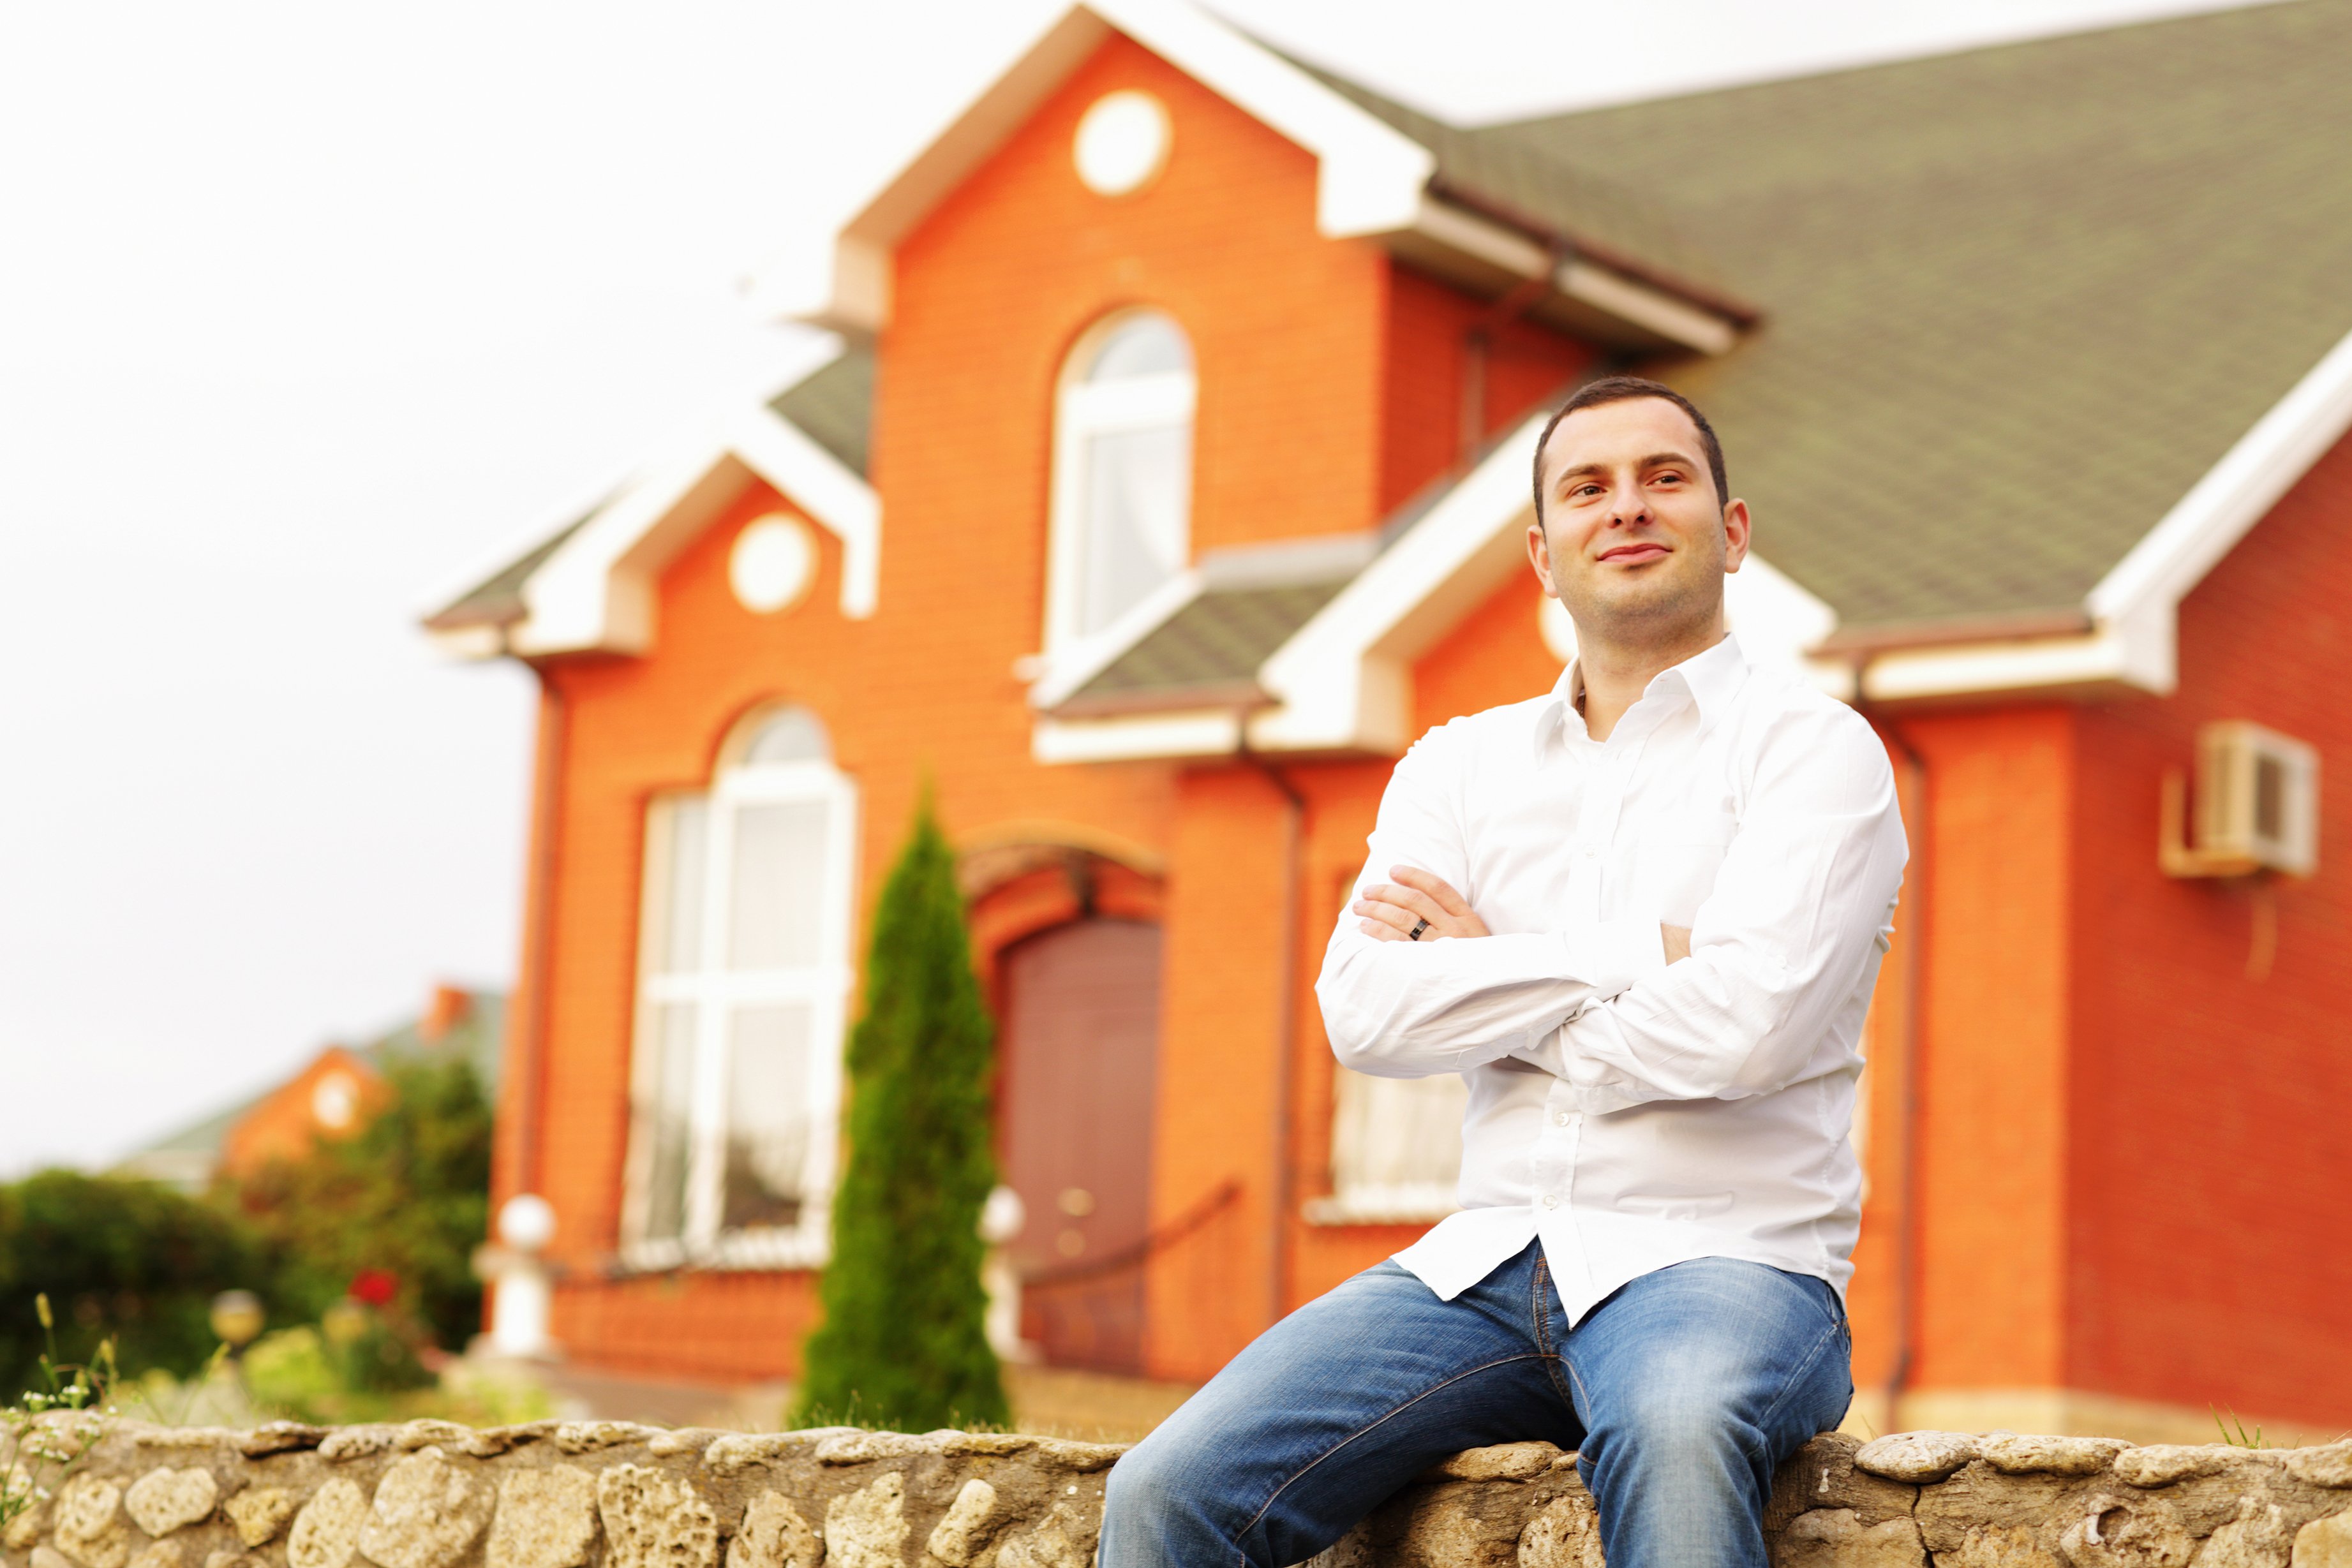 Happy man sitting in front of an orange-bricked house | Photo: Shutterstock